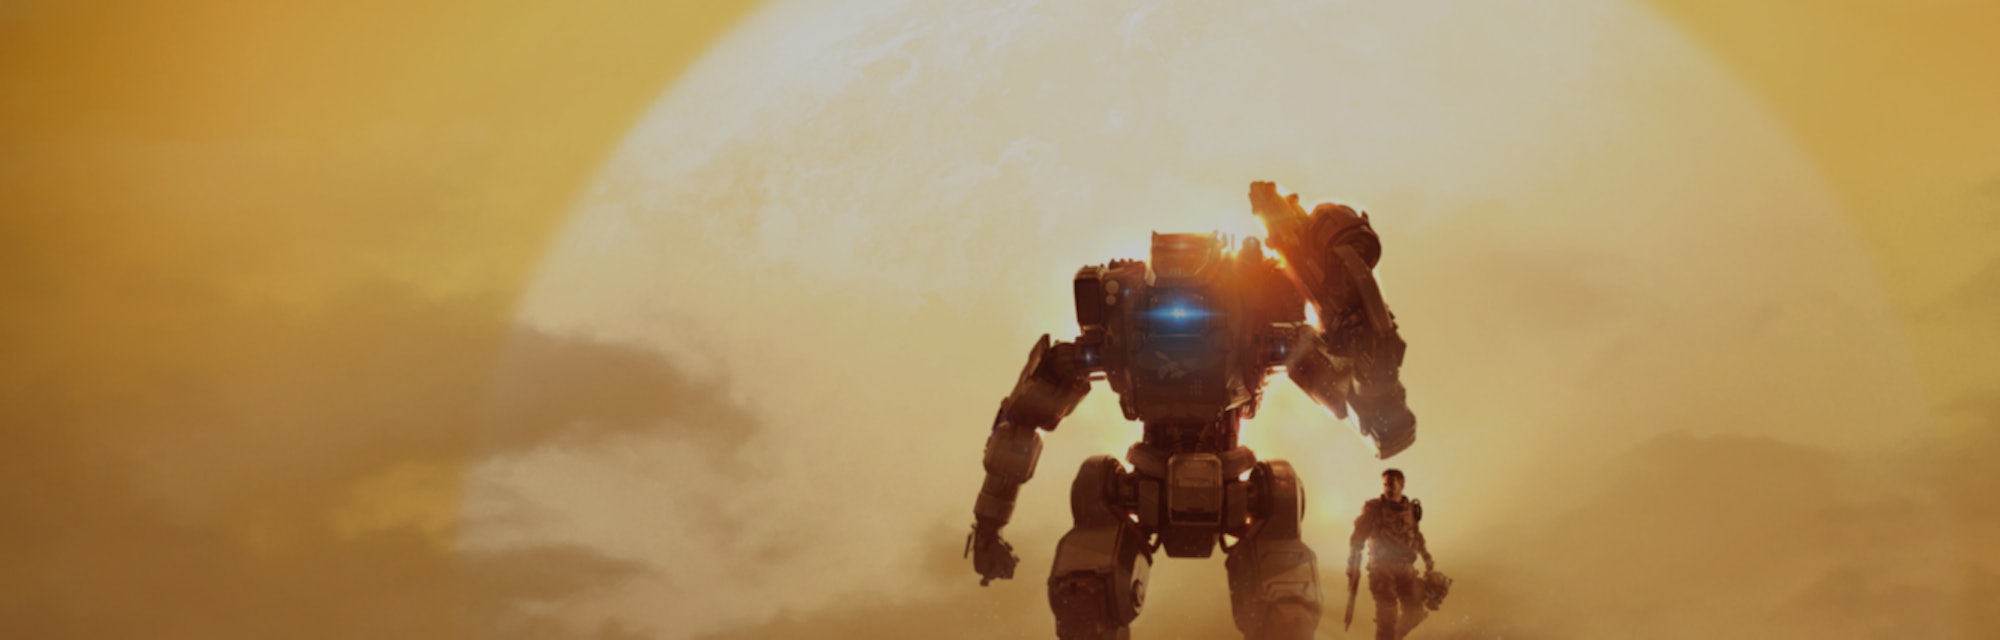 Image from Titanfall 2 game showing mech robot and man standing in front of large, golden sun rising...